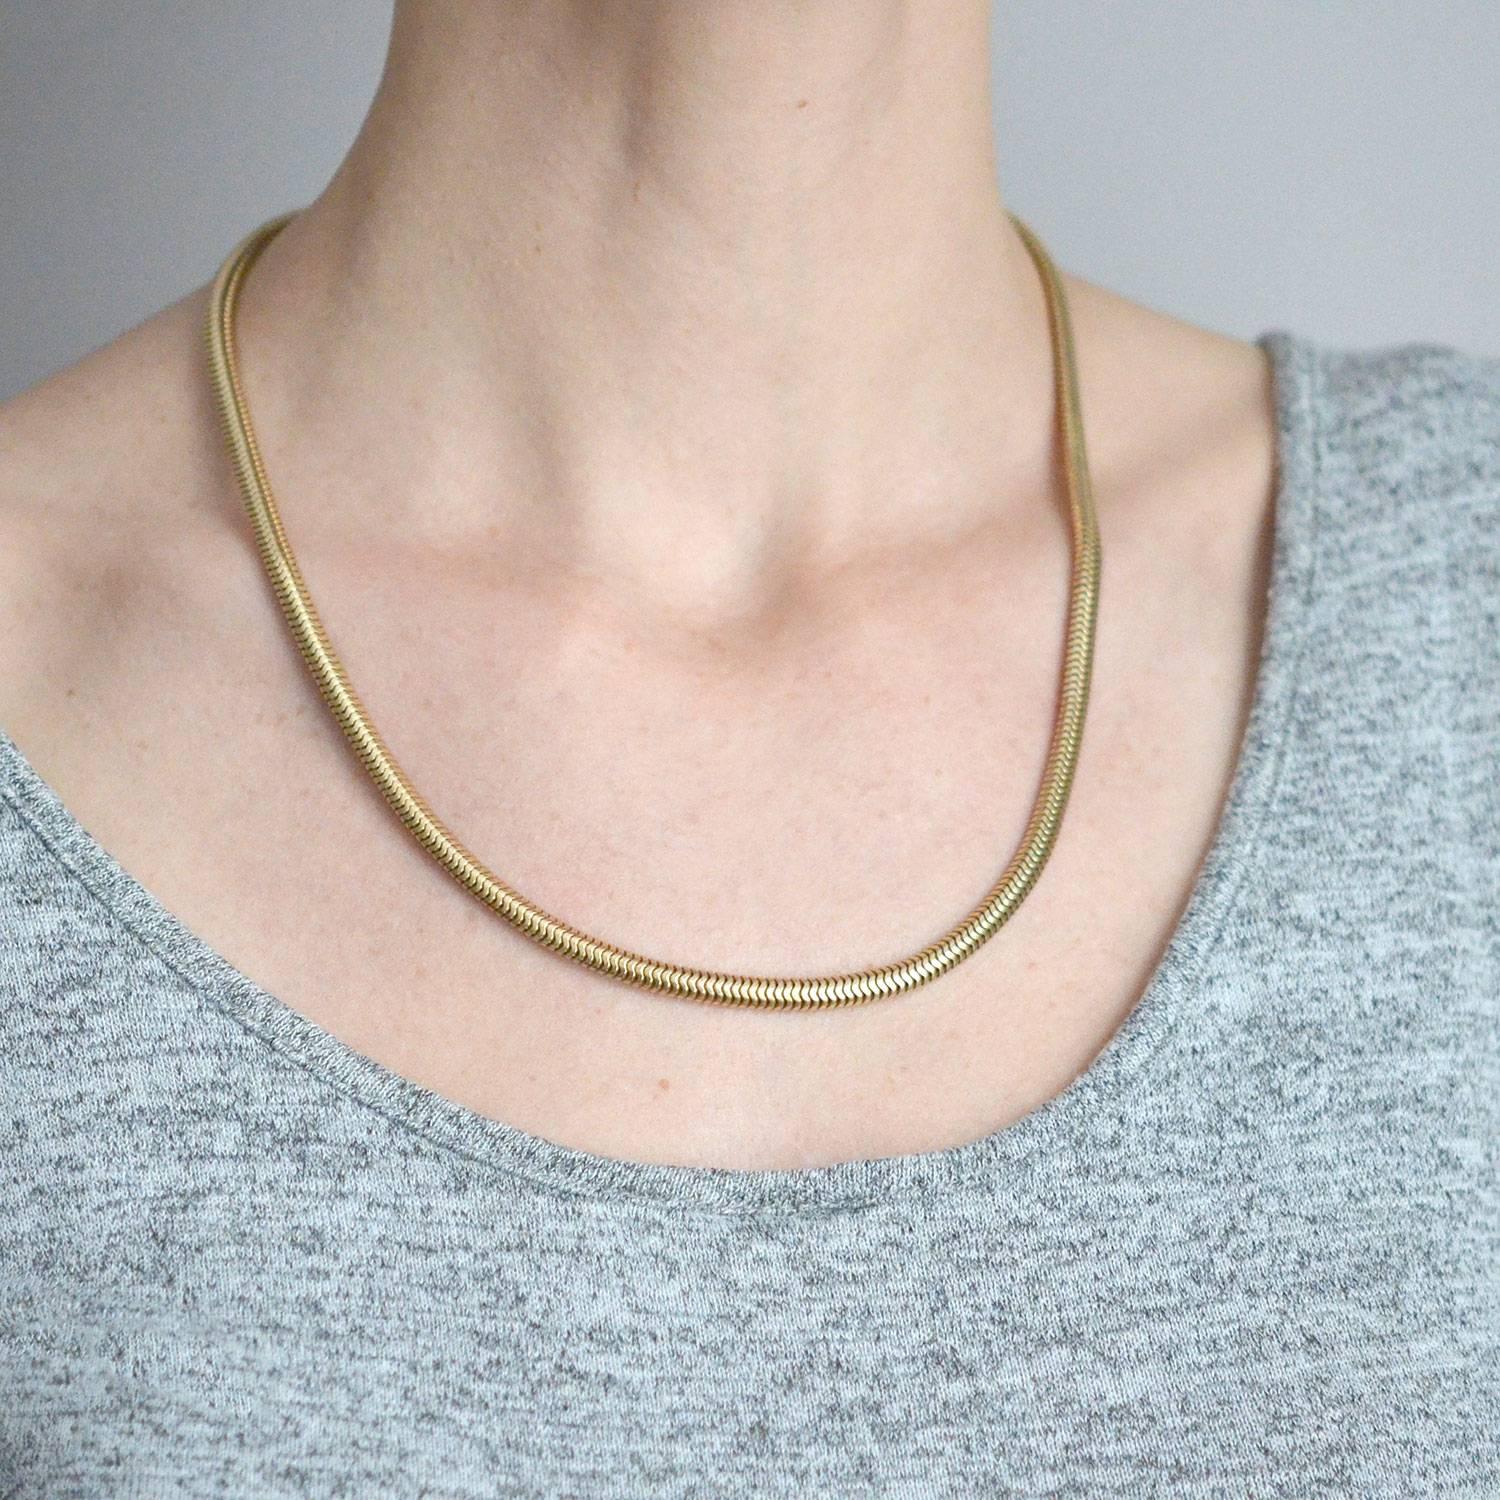 Women's or Men's Retro Gold Snake Chain Necklace